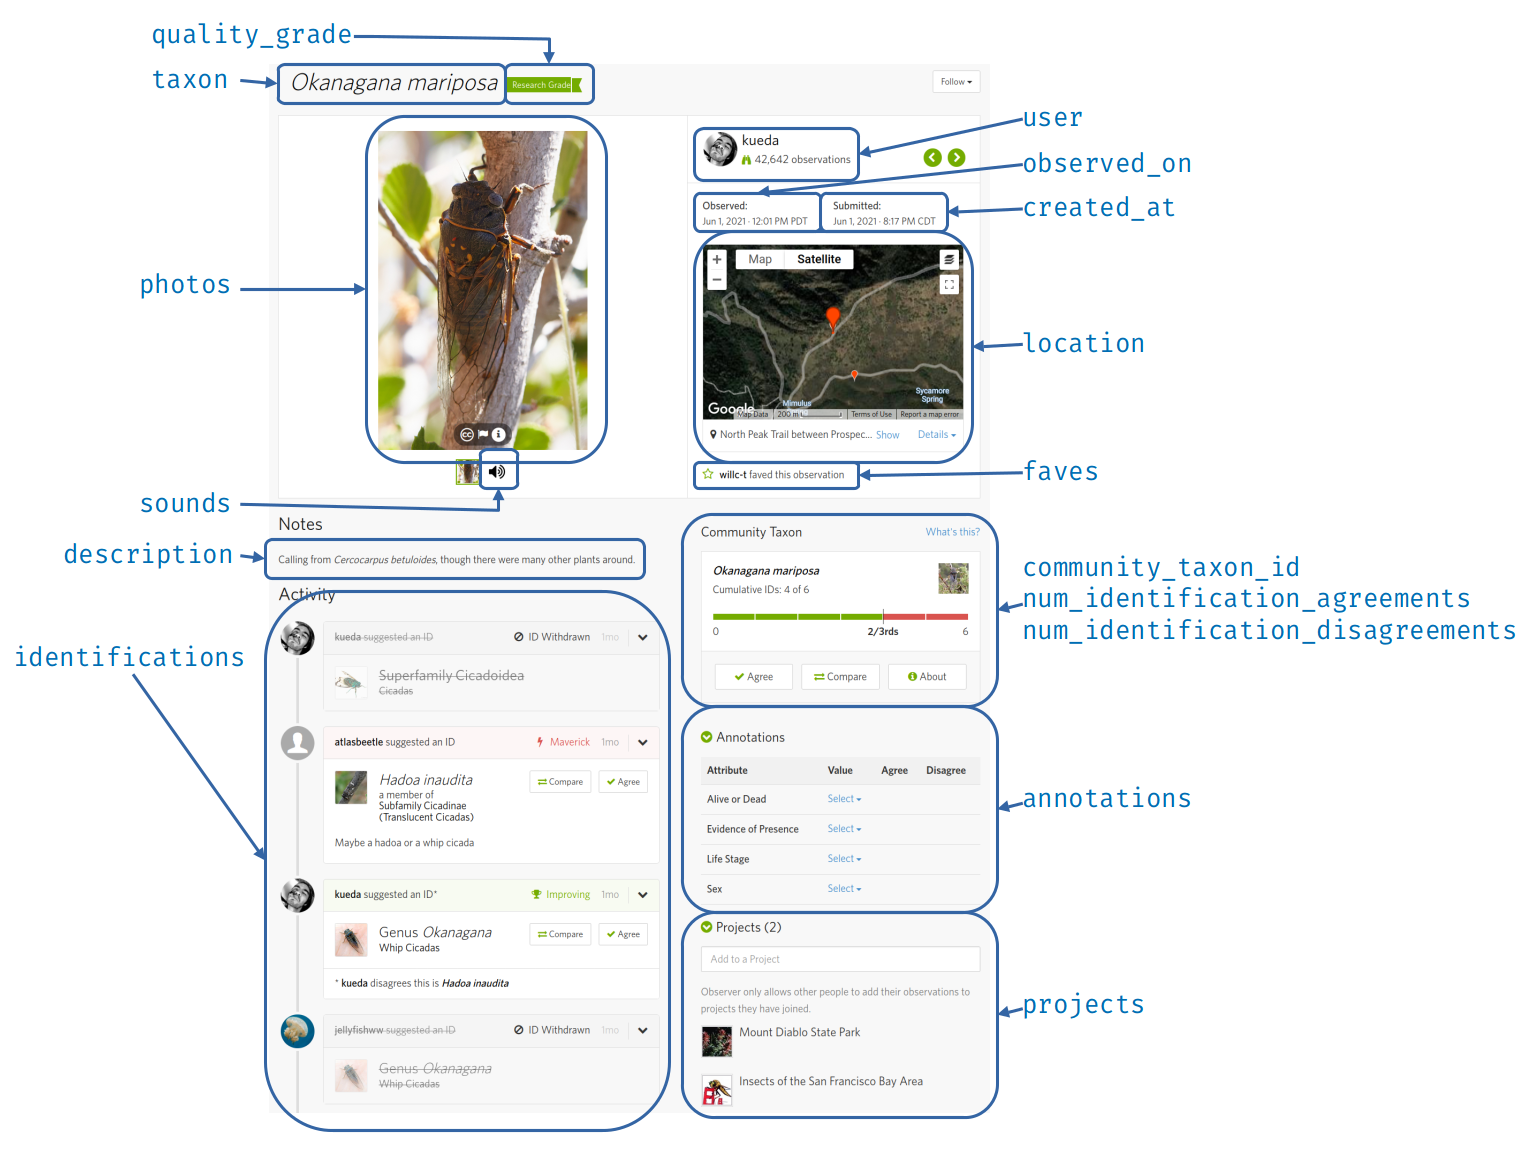 ../_images/inat-observation-page-annotated.png